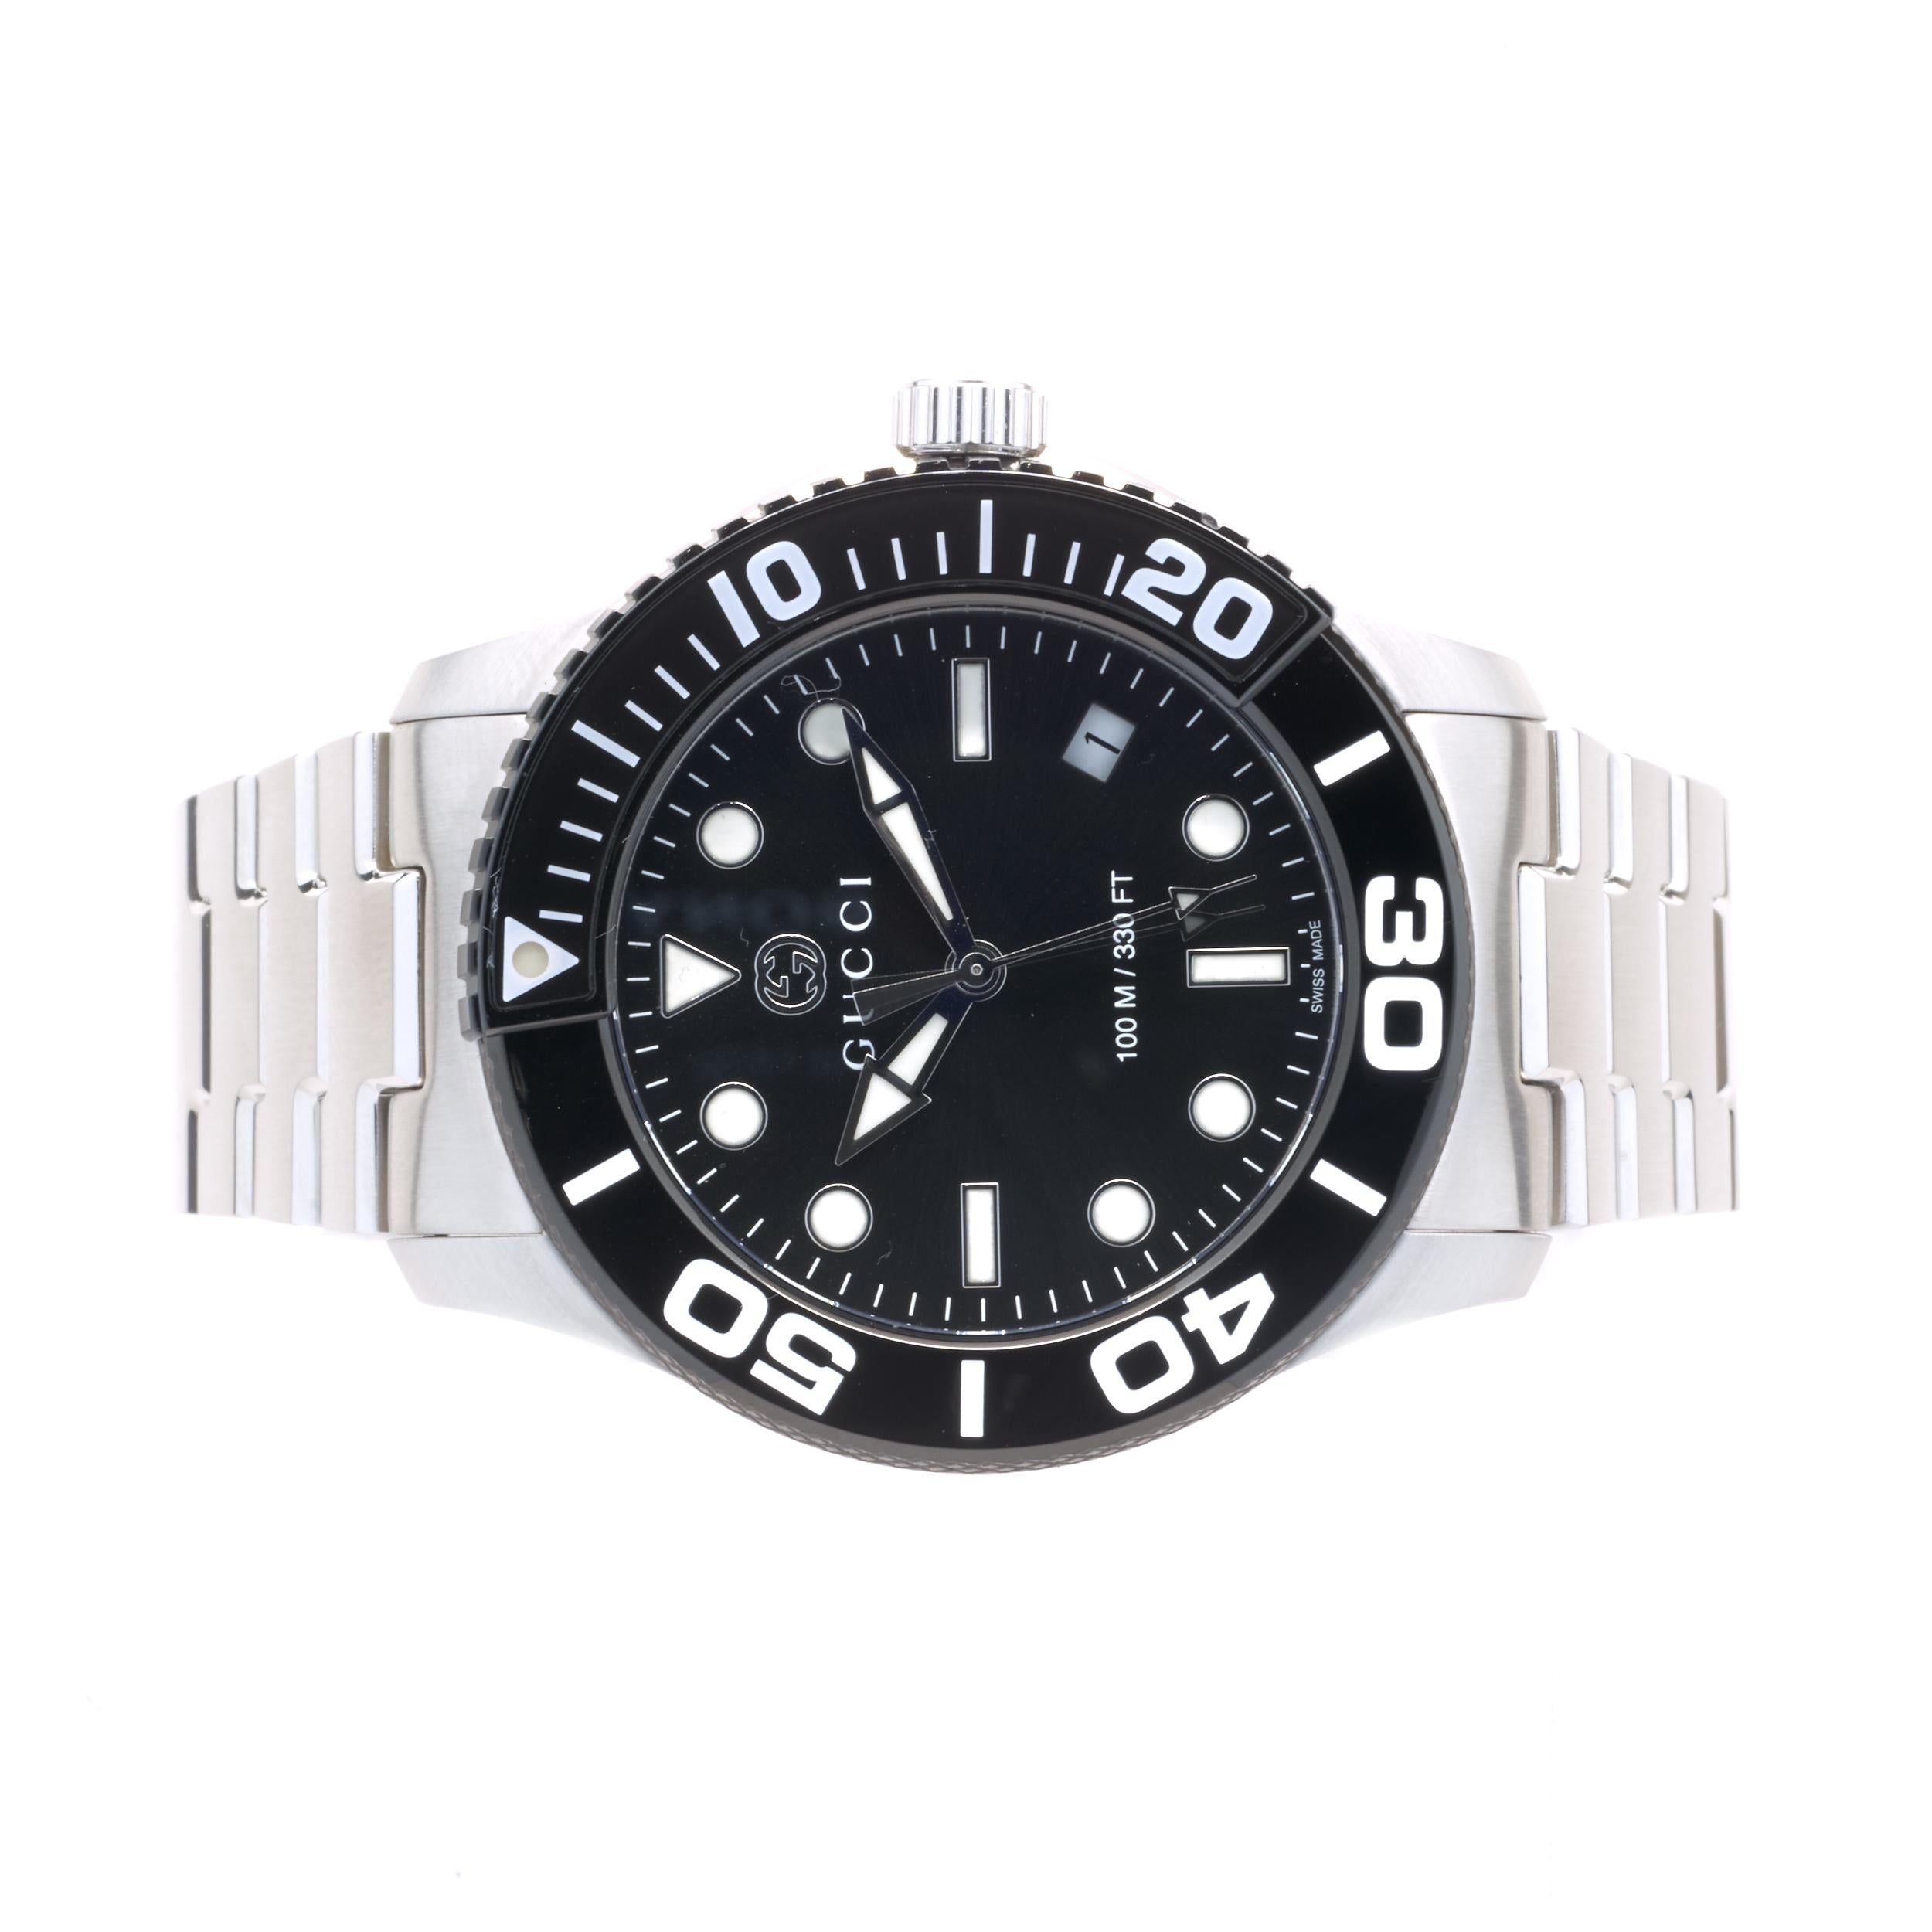 Movement: quartz 
Function: hours, minutes, seconds, date
Case: round 40mm stainless steel case with black rotating, sapphire crystal, pull/push crown
Band: stainless steel link bracelet with butterfly clasp
Dial: black dot dial
Serial #: